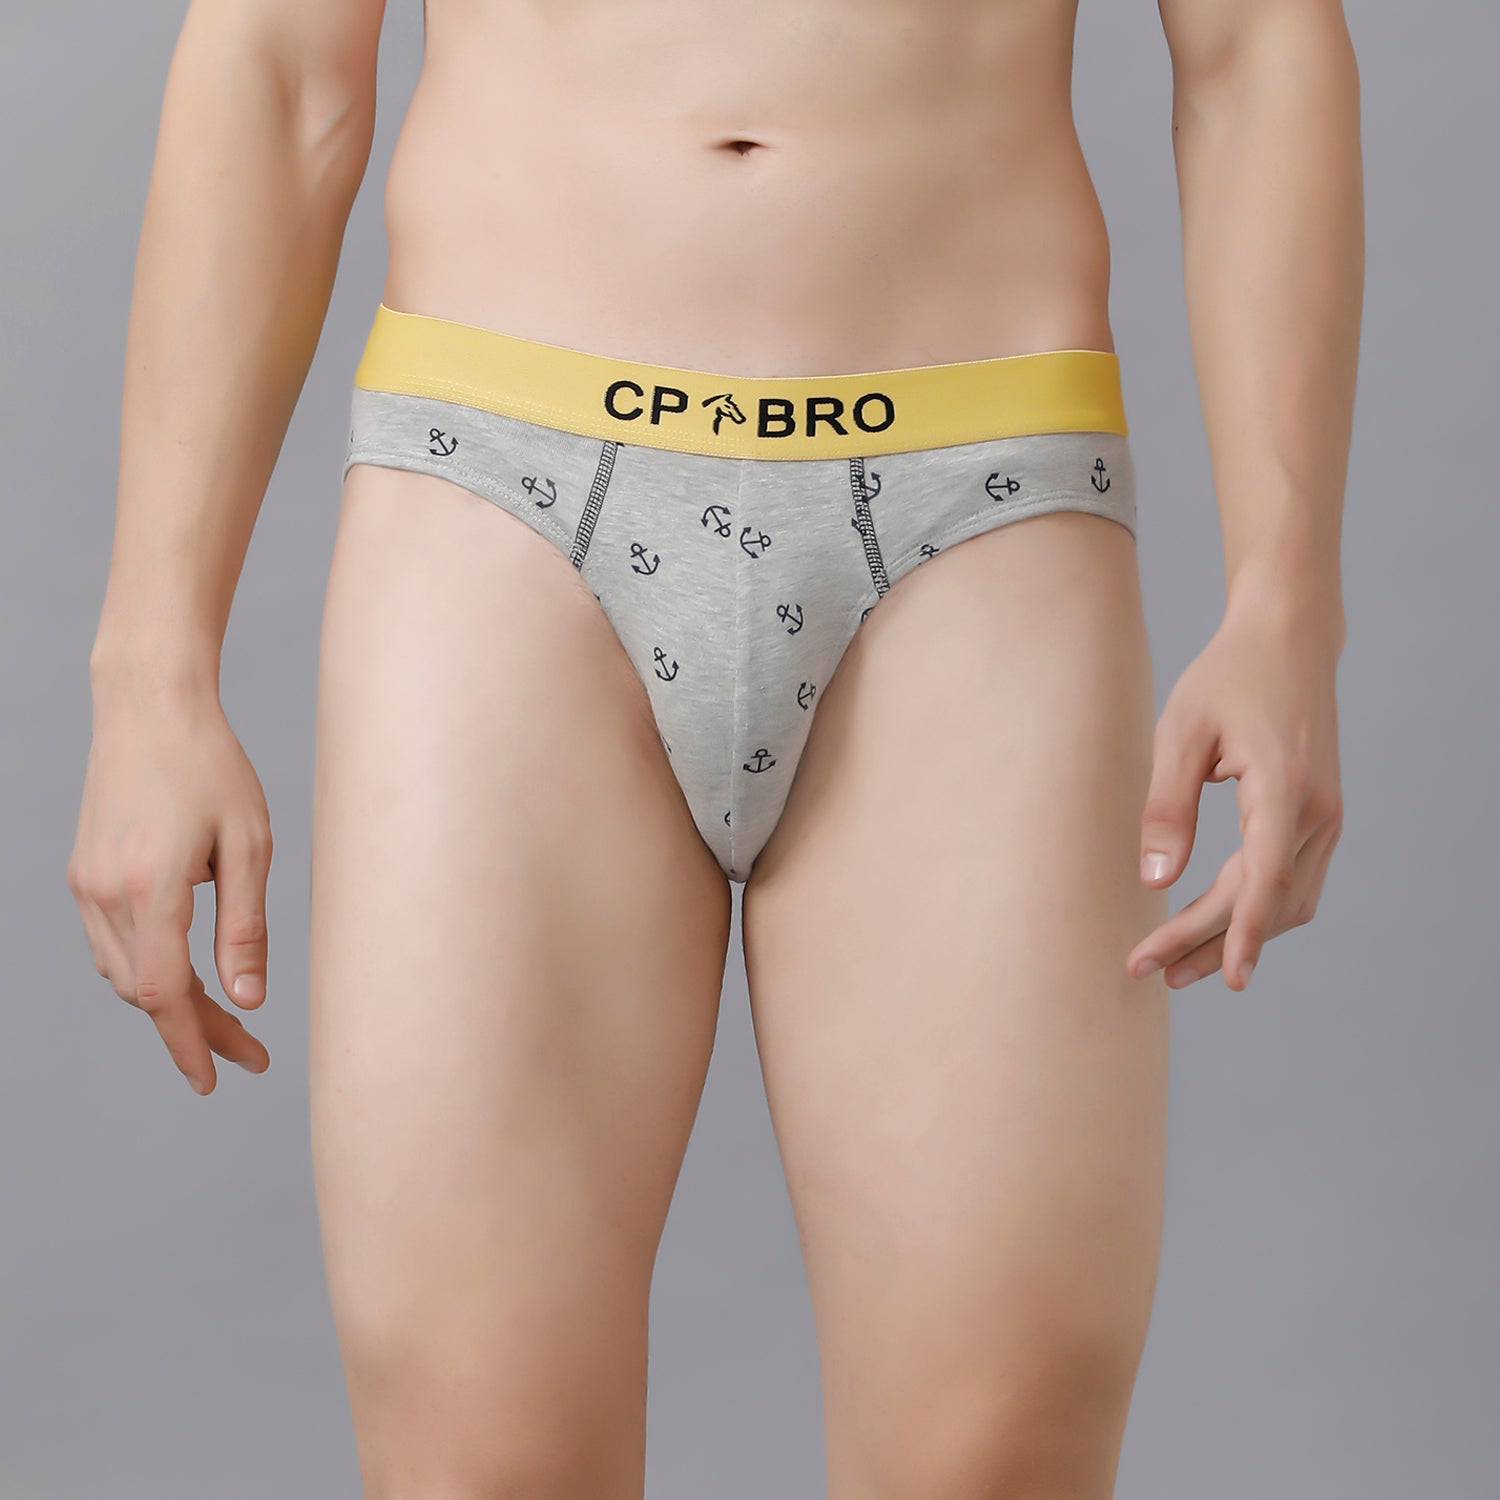 CP BRO Printed Briefs with Exposed Waistband Value - Black Dot (Pack of 2)